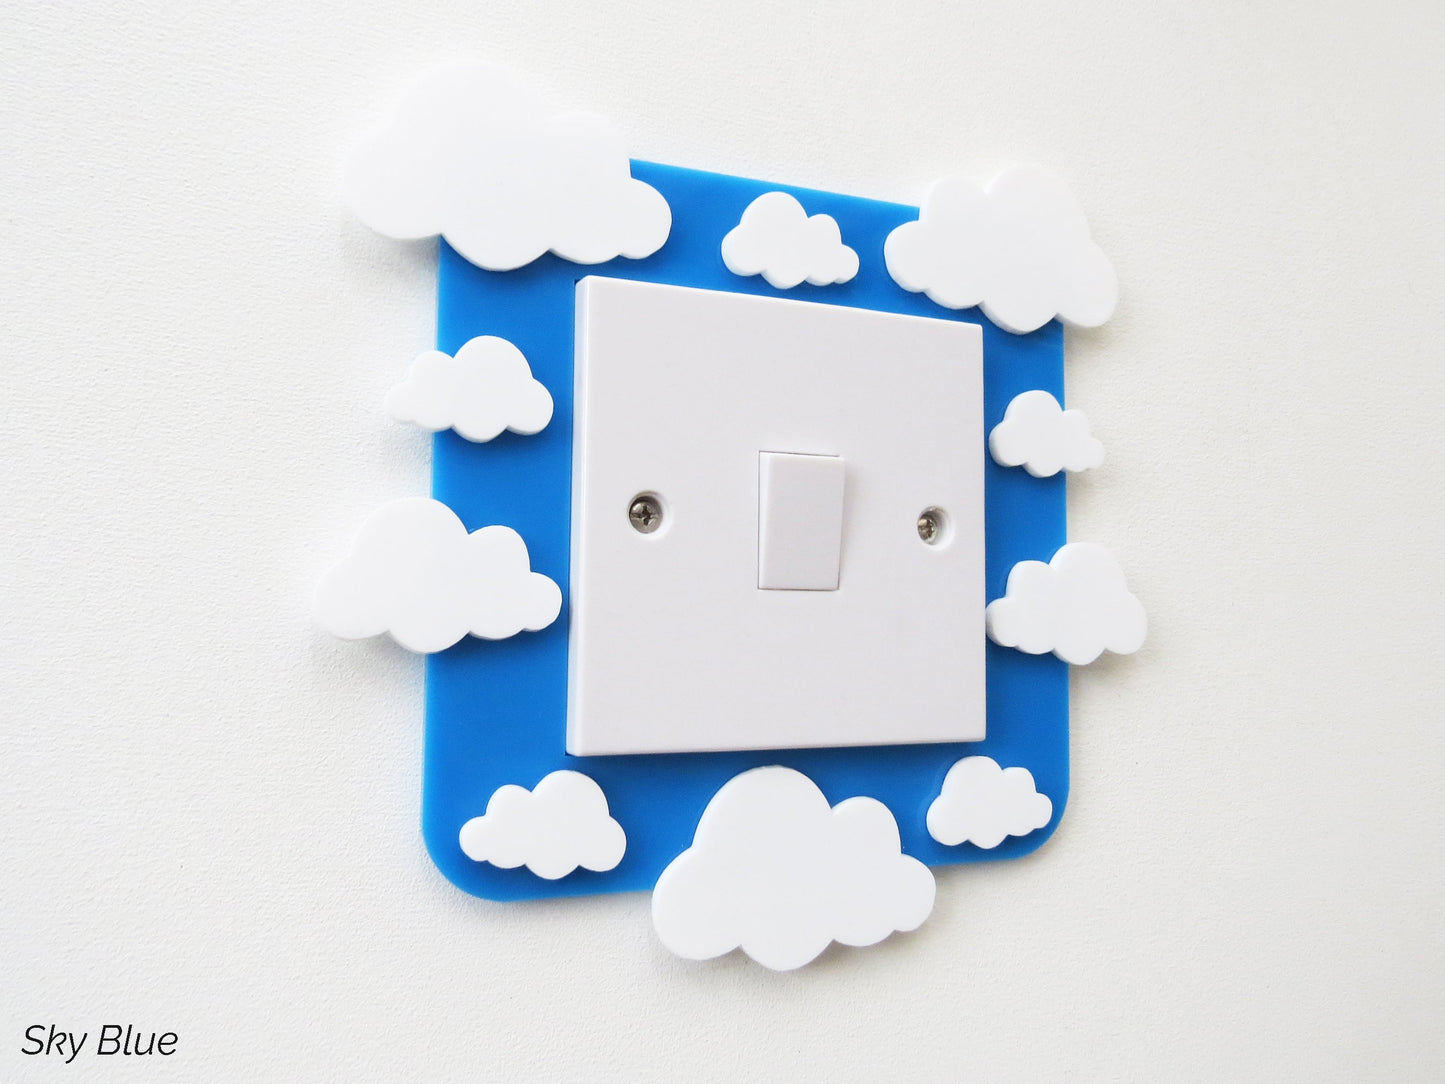 A kids bedroom acrylic light surround decoratedwith clouds.